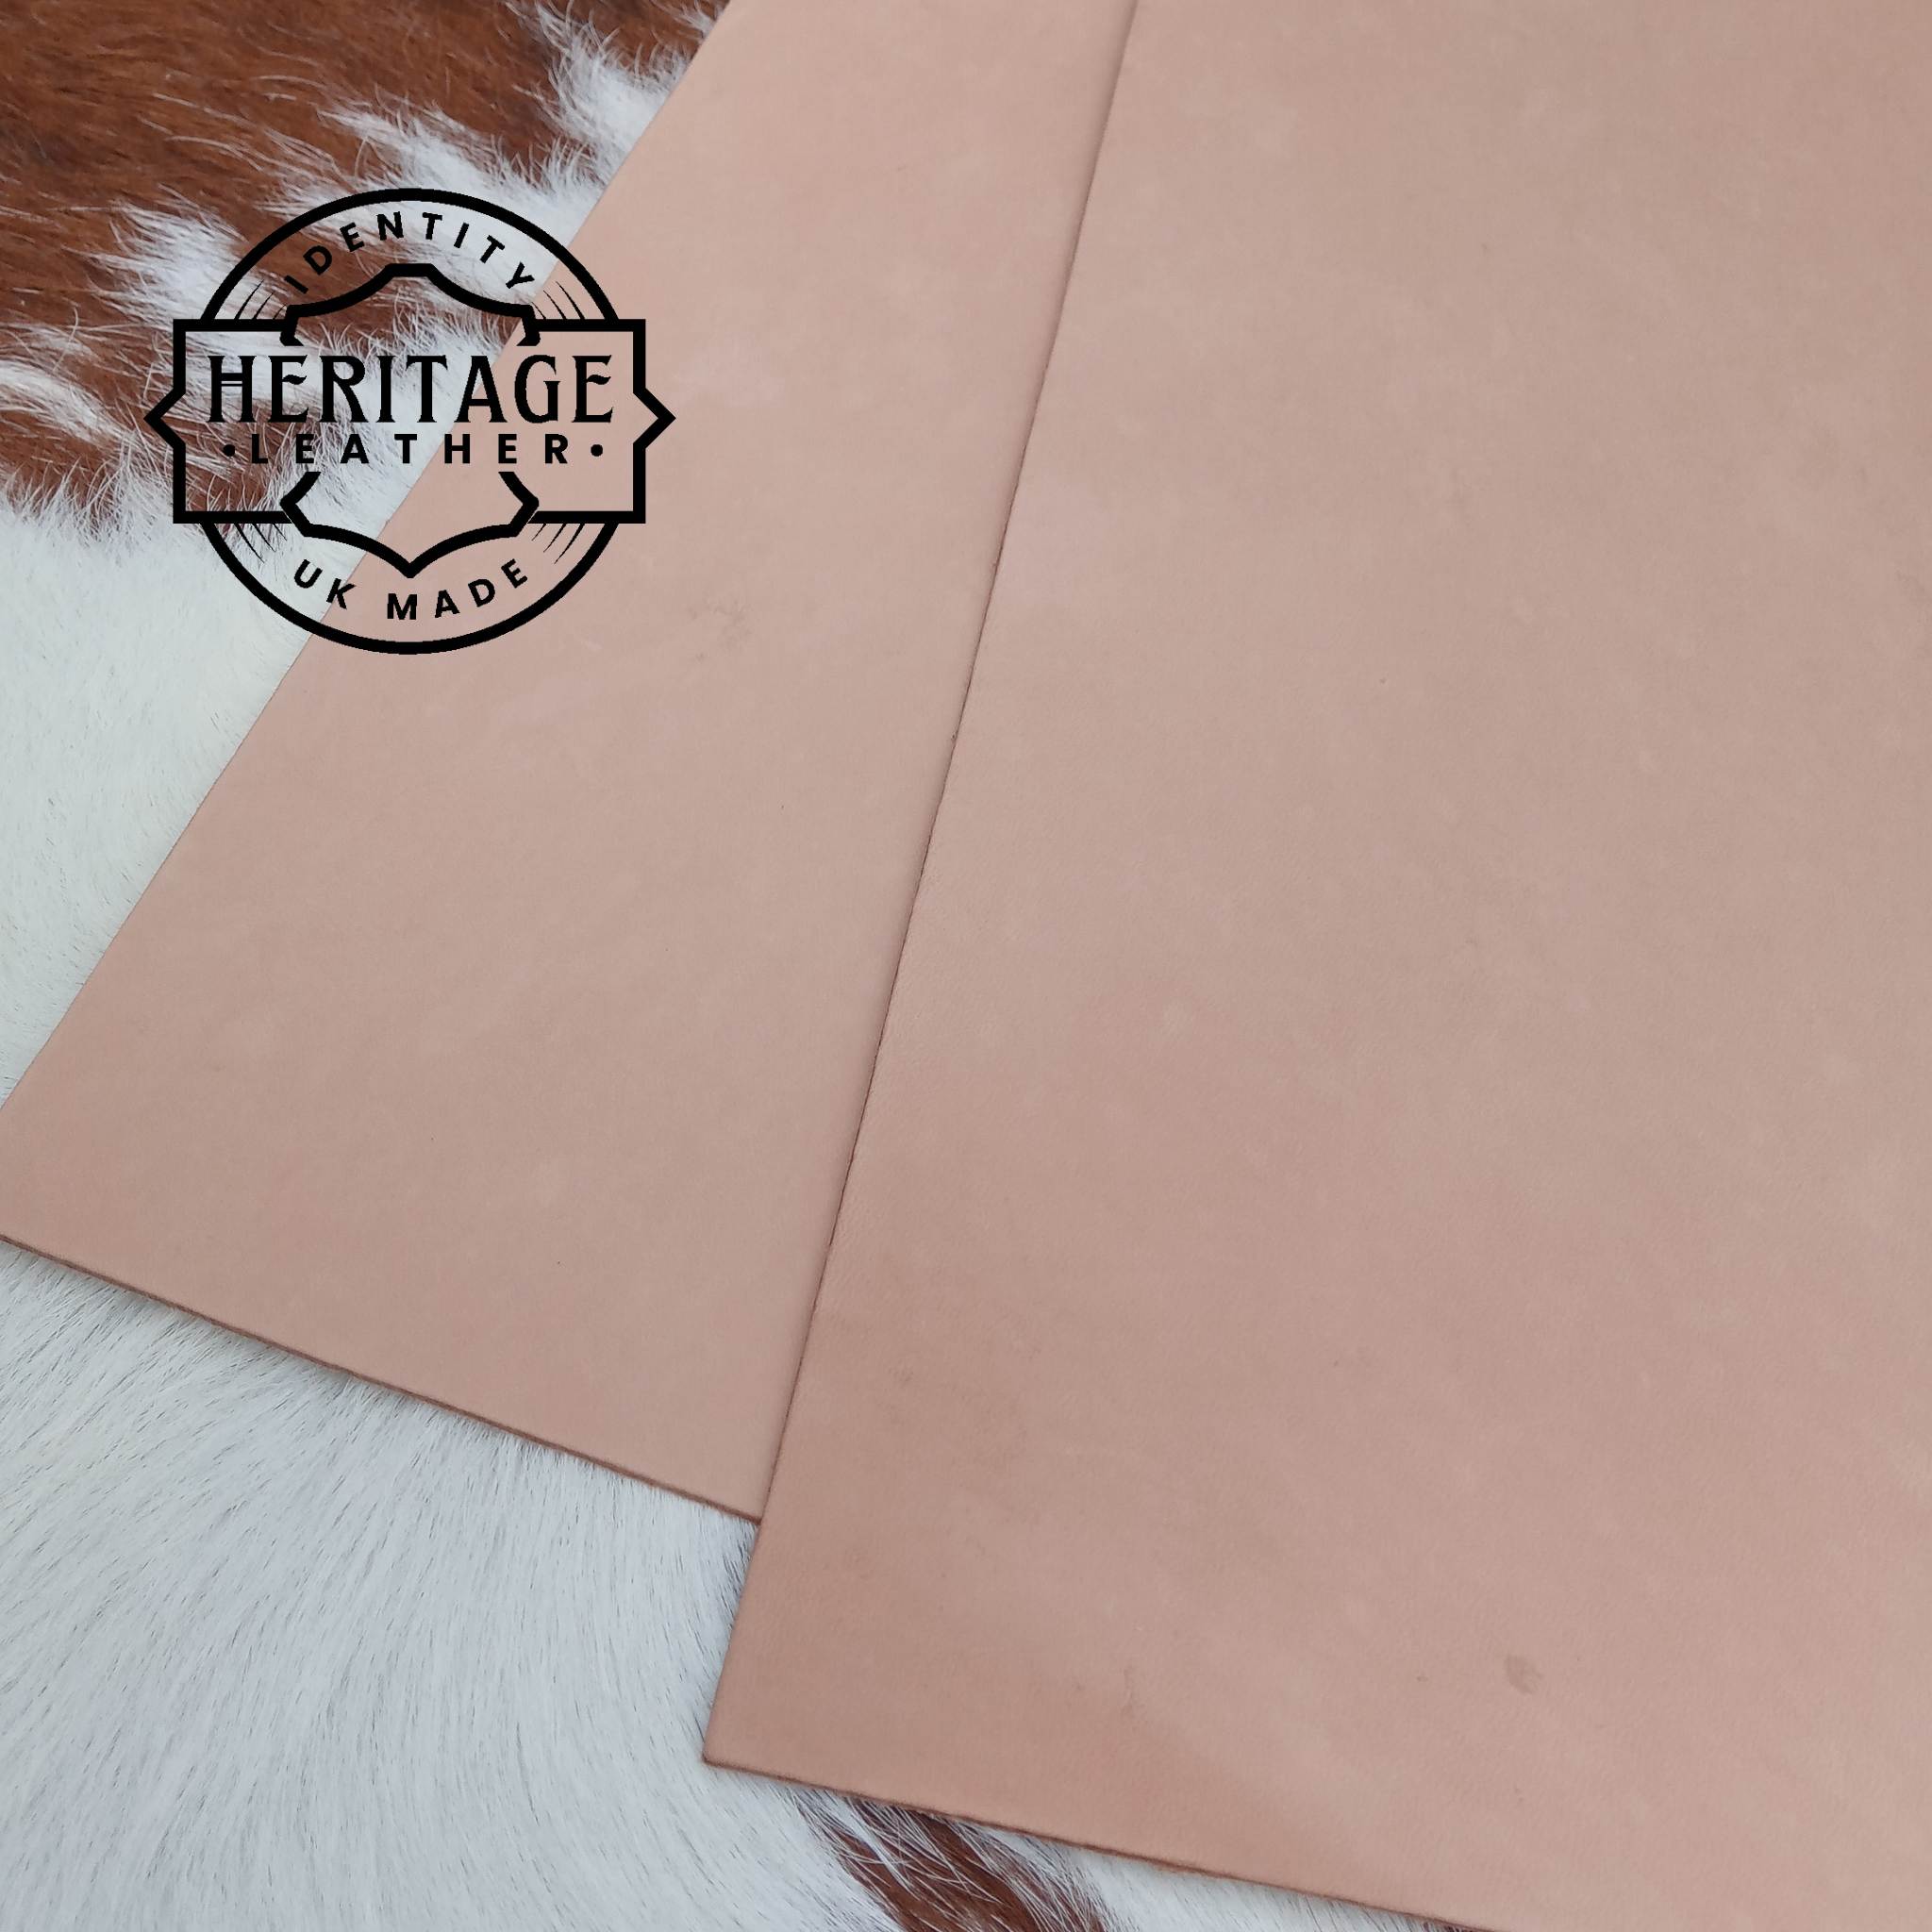 Authentic, heritage UK tanned leather for a more mellow feel. It has subtle characteristics and will dye, colour and polish to give a lovely effect, ideal for card cases, wallets, and small leather craft projects